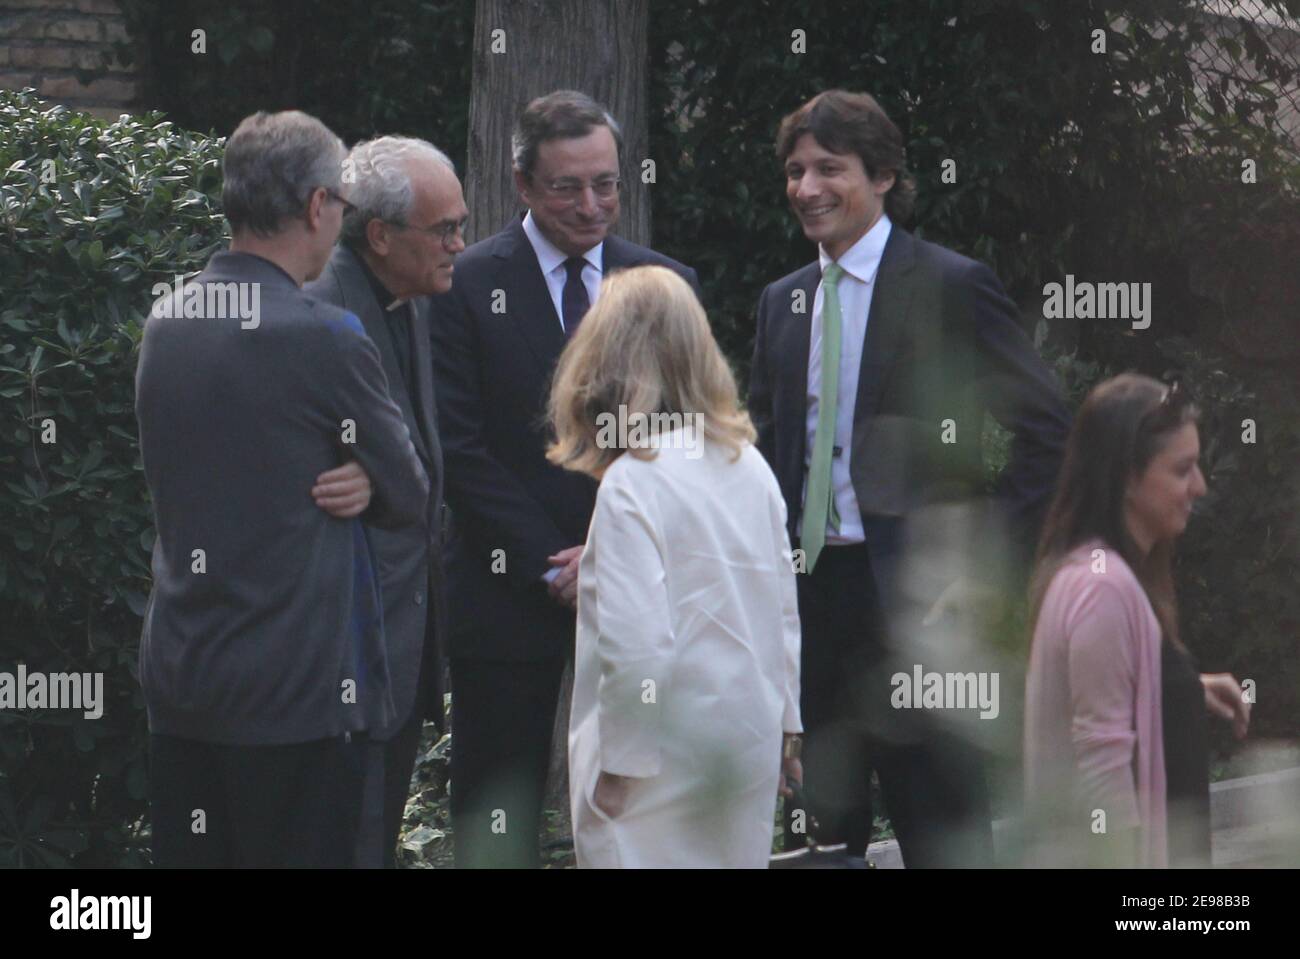 Roma Mario Draghi, President of the European Central Bank from 1 November 2011, with his family, his wife Serena Hat (white coat) and his son James, participating in the naming ceremony of his nephew in the church of St. Agnes in Rome. Mario Draghi speaks before the ceremony with a priest and confess it seems. exclusve Stock Photo